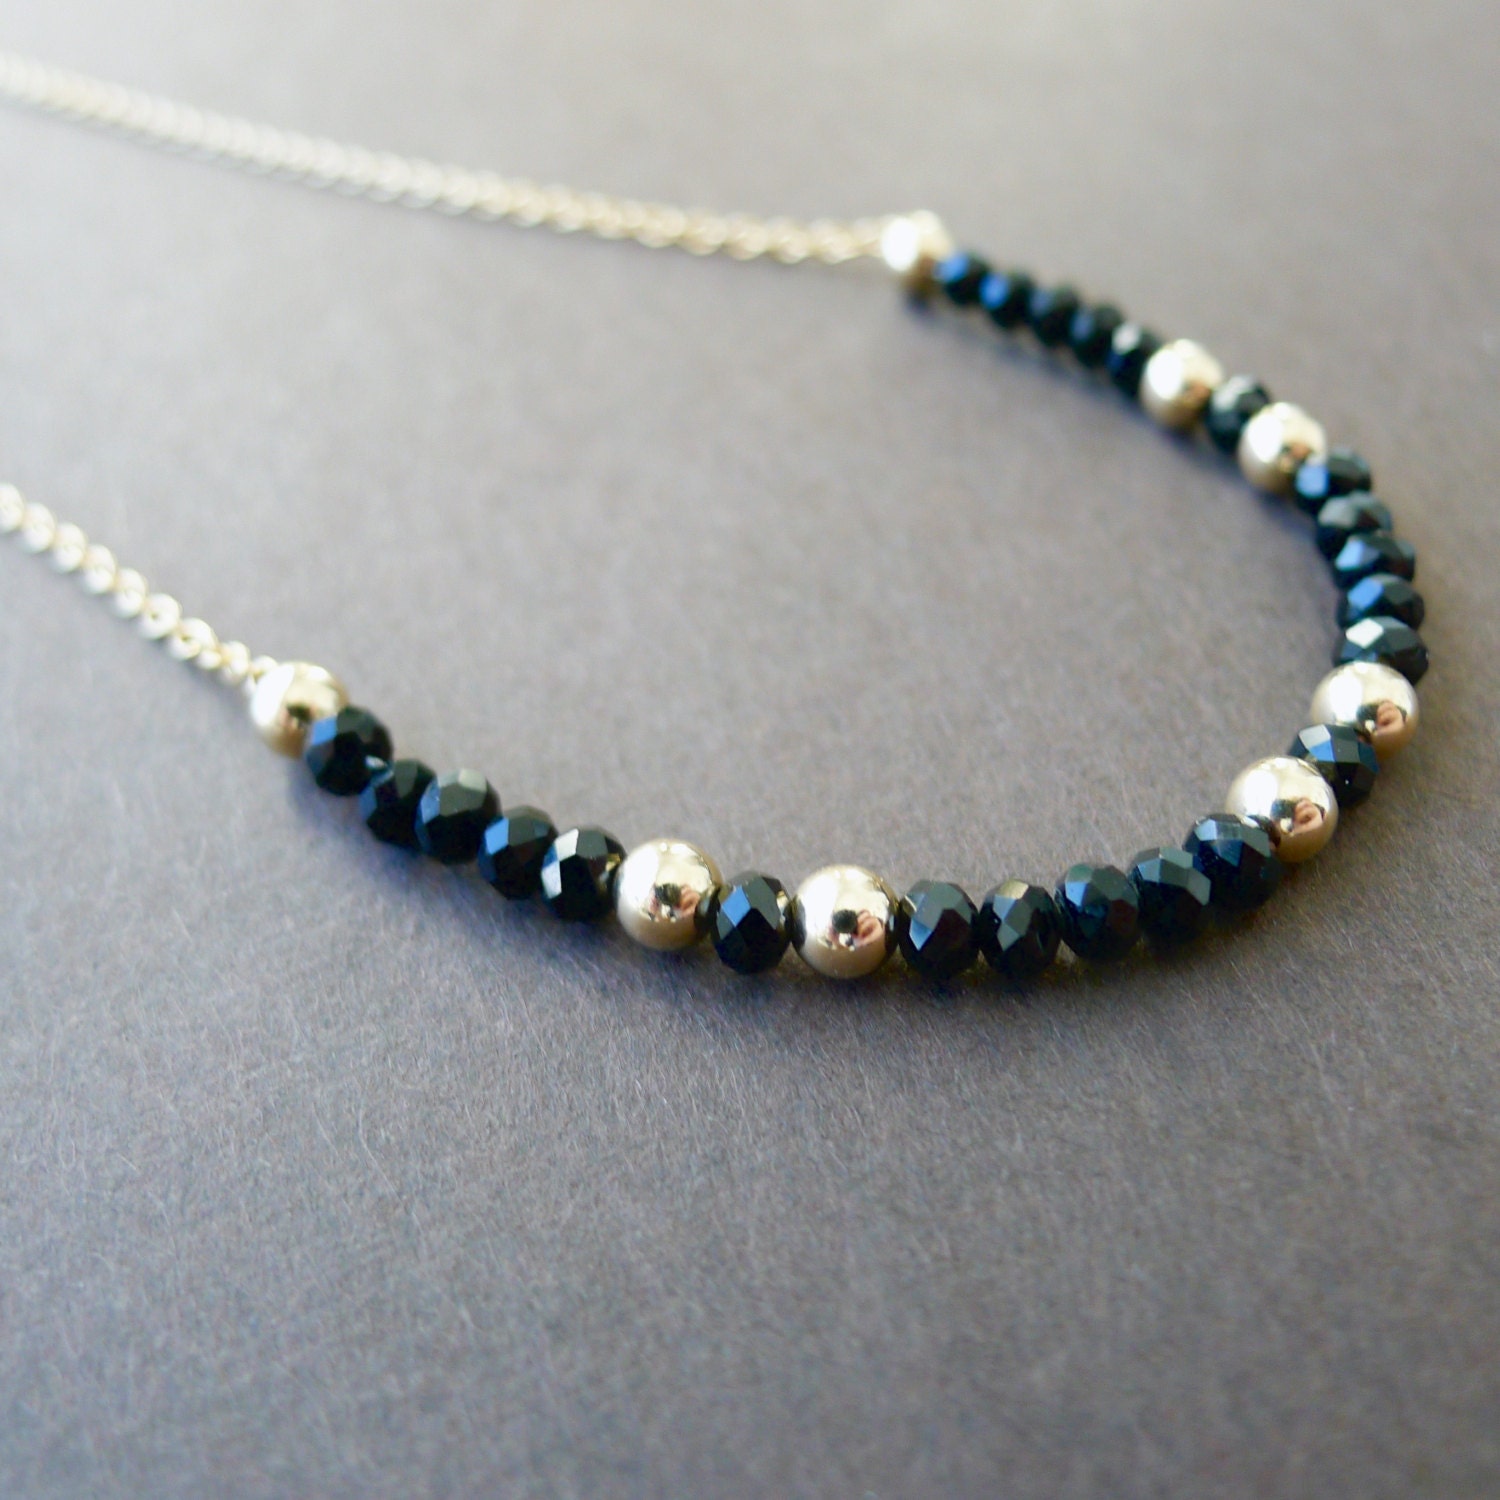 Modern Gemstone Necklace, Black and Gold Necklace, Black Stone Necklace, Spinel Necklace, Minimalist Necklace, Simple Necklace